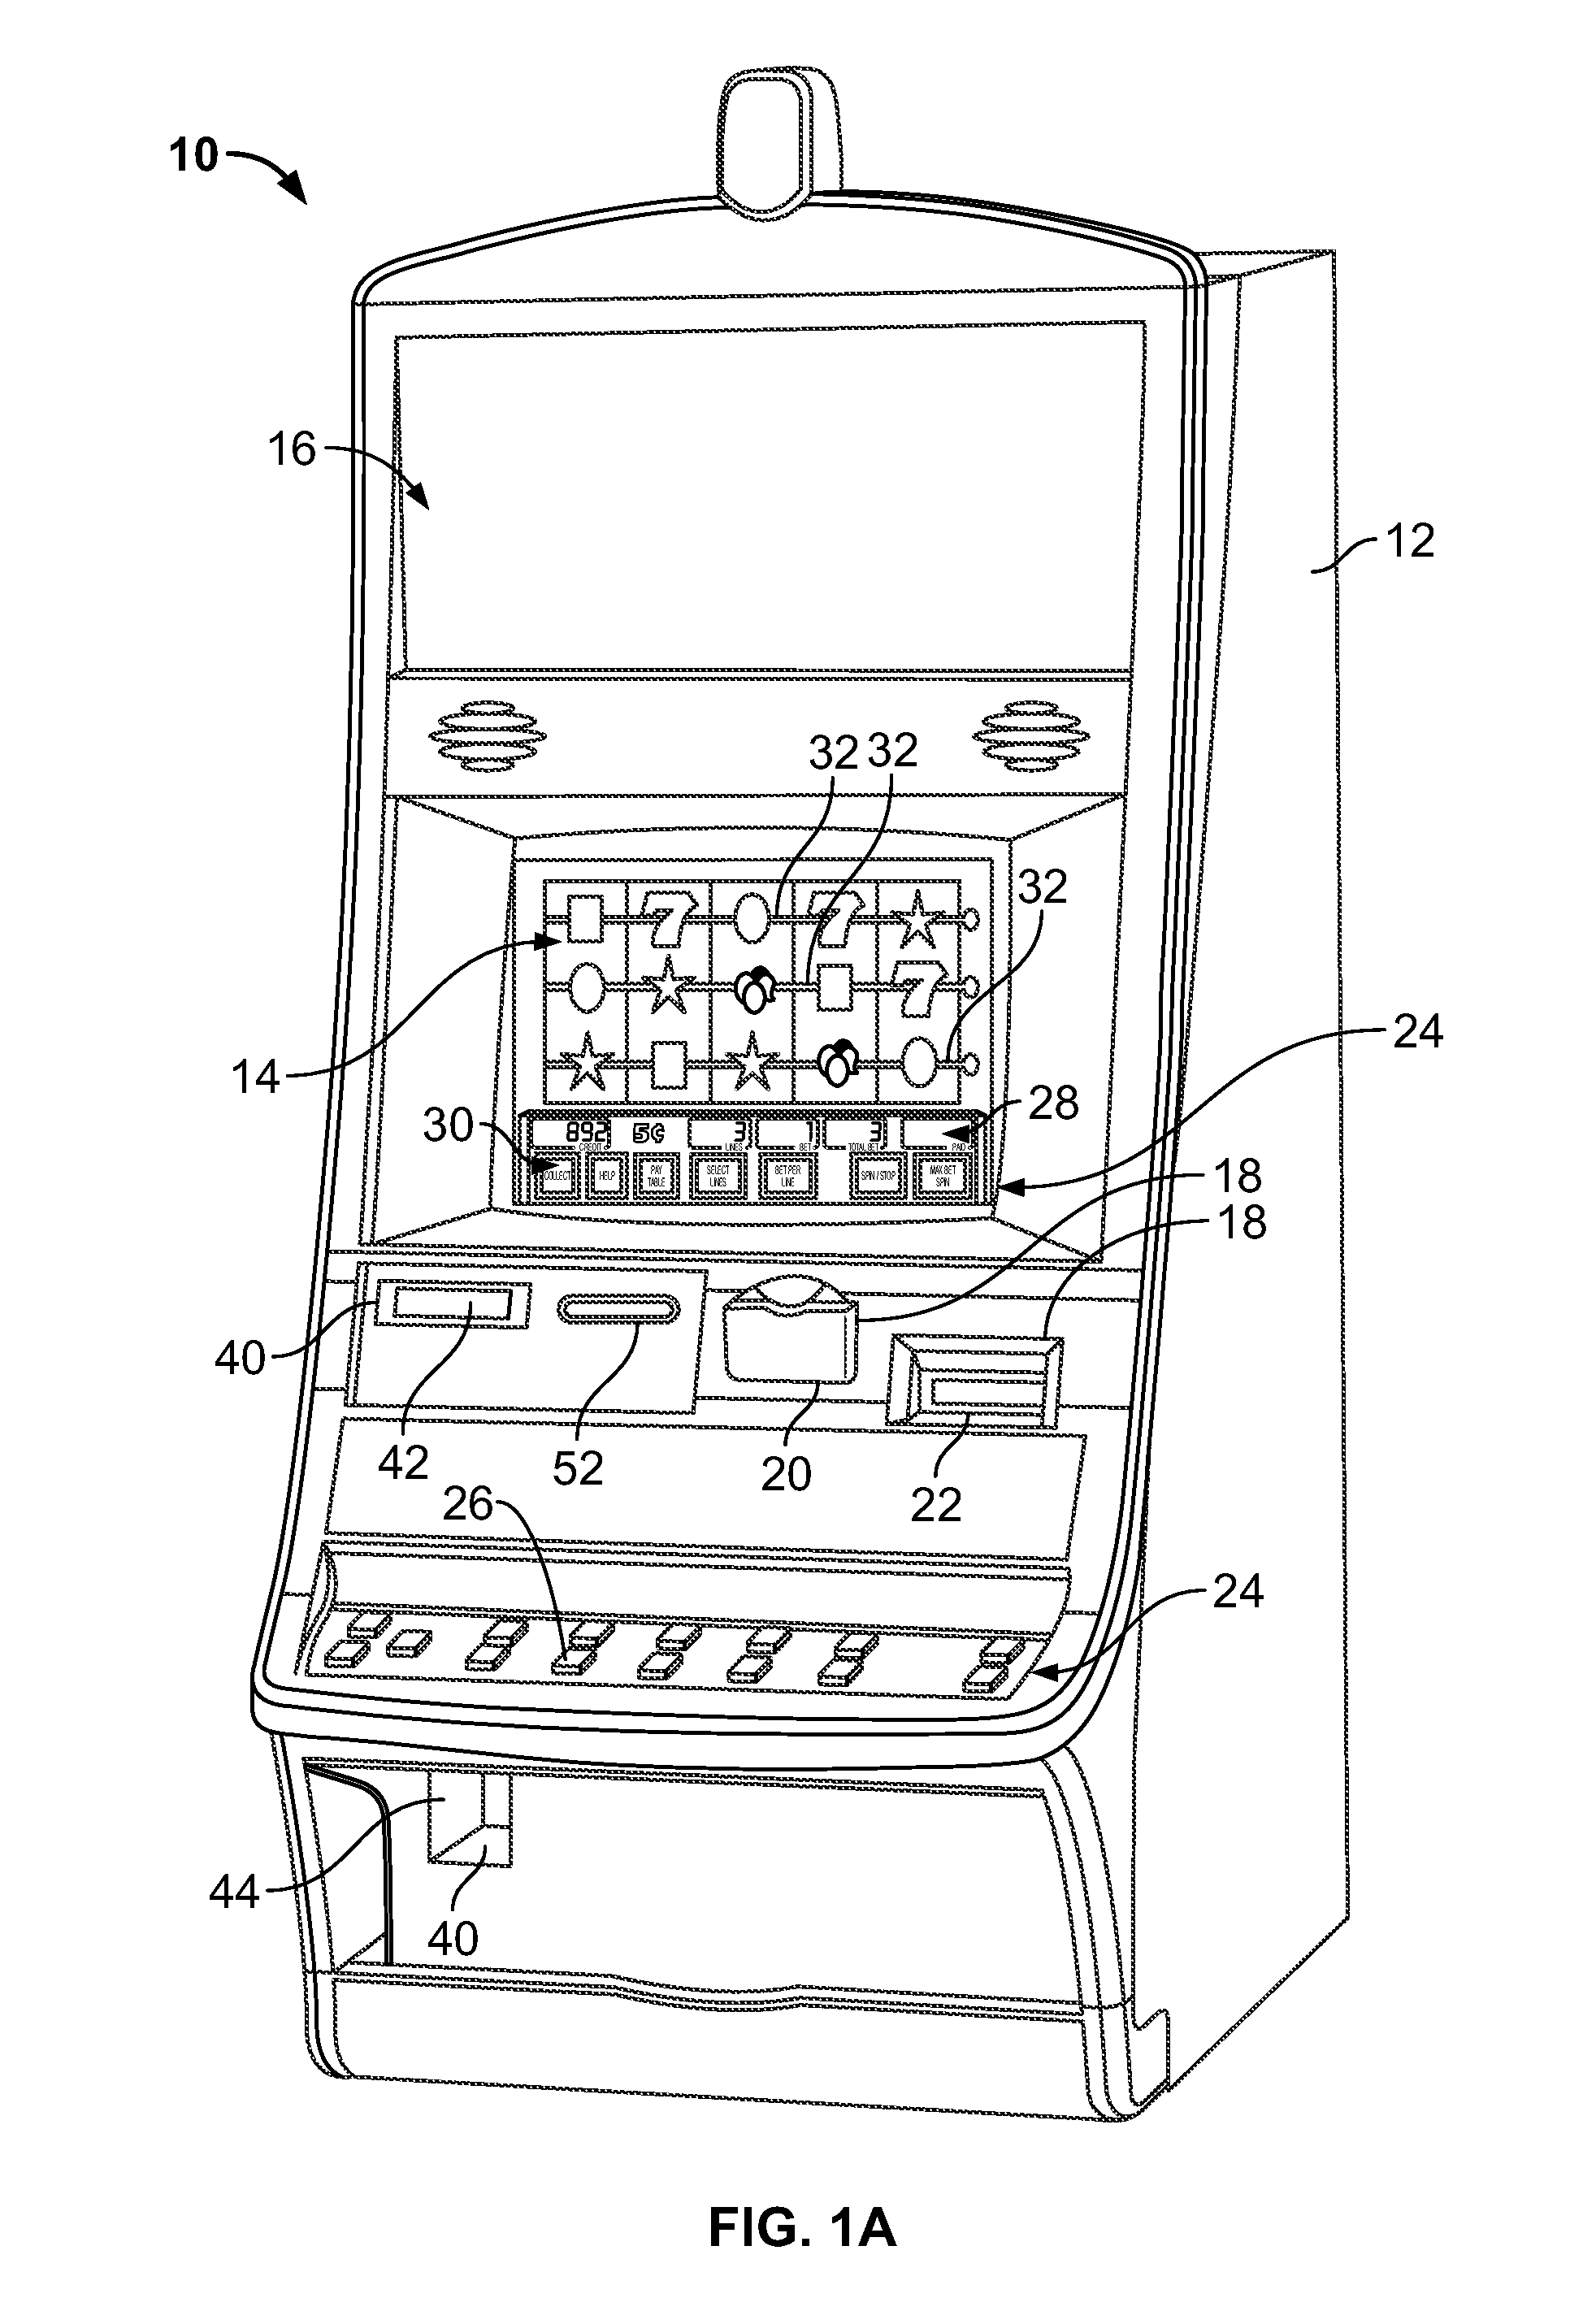 Methods of Receiving Electronic Wagers in a Wagering Game Via a Handheld Electronic Wager Input Device